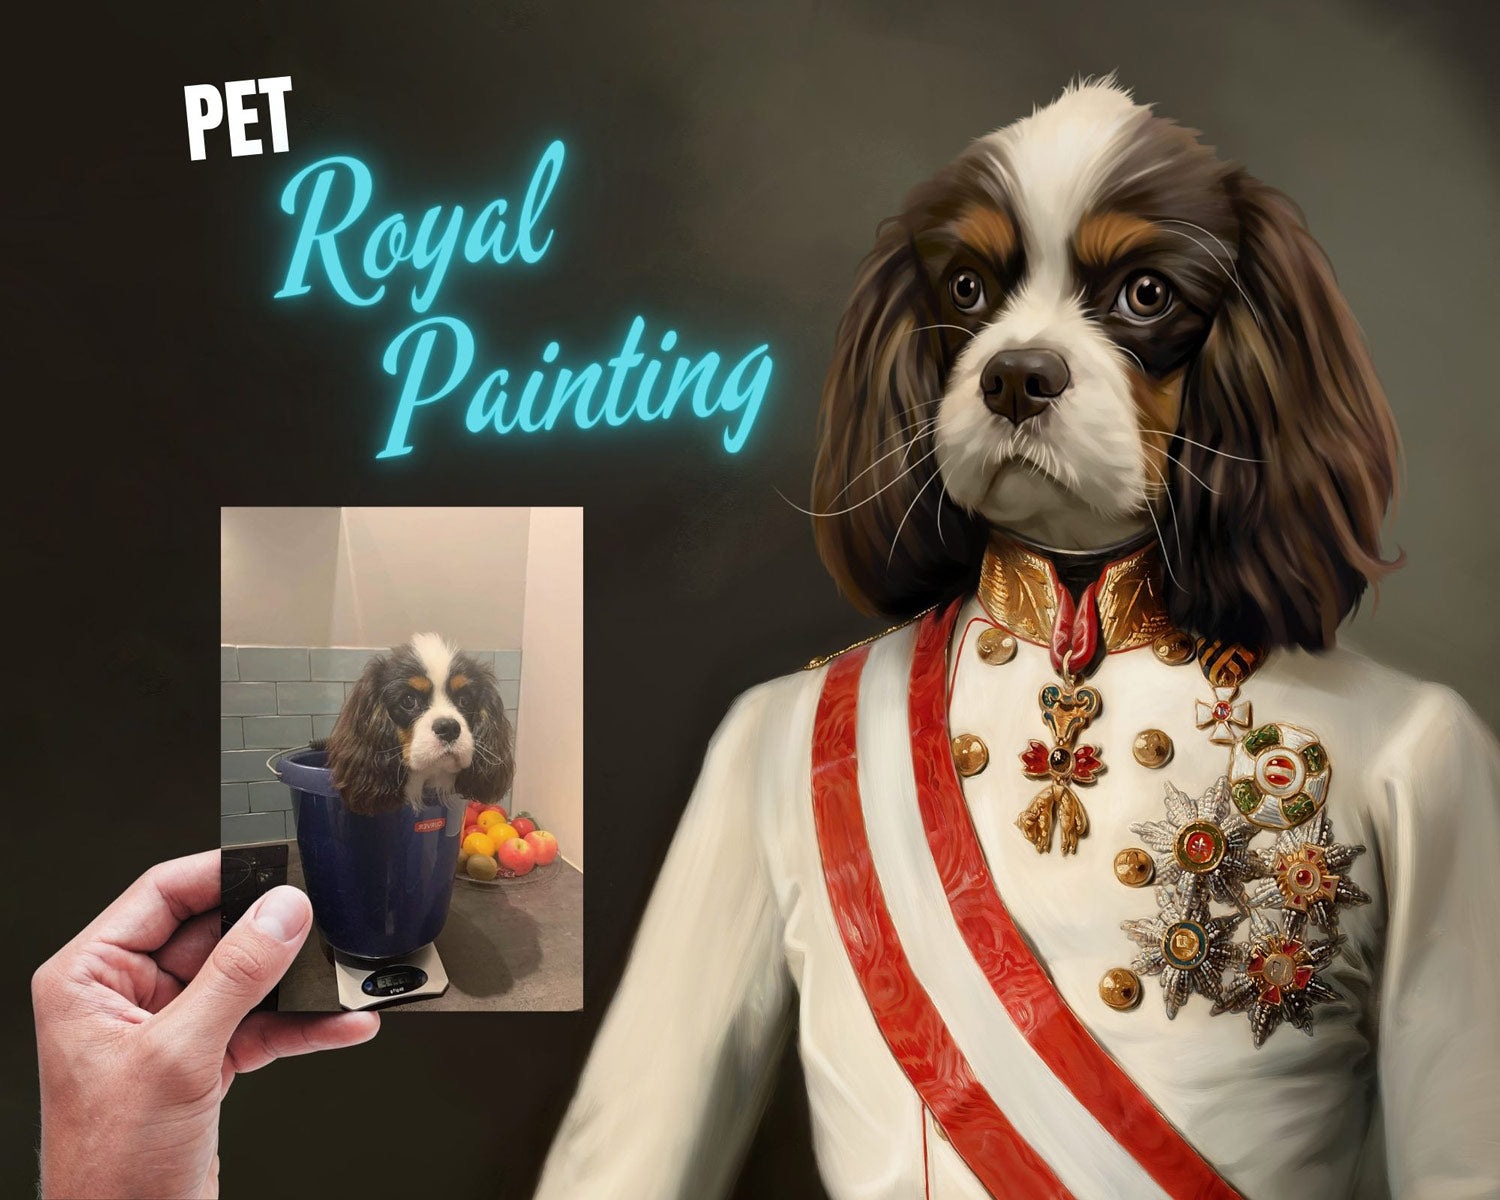 A renaissance pet portrait painting, custom-made from a image and a historical costume